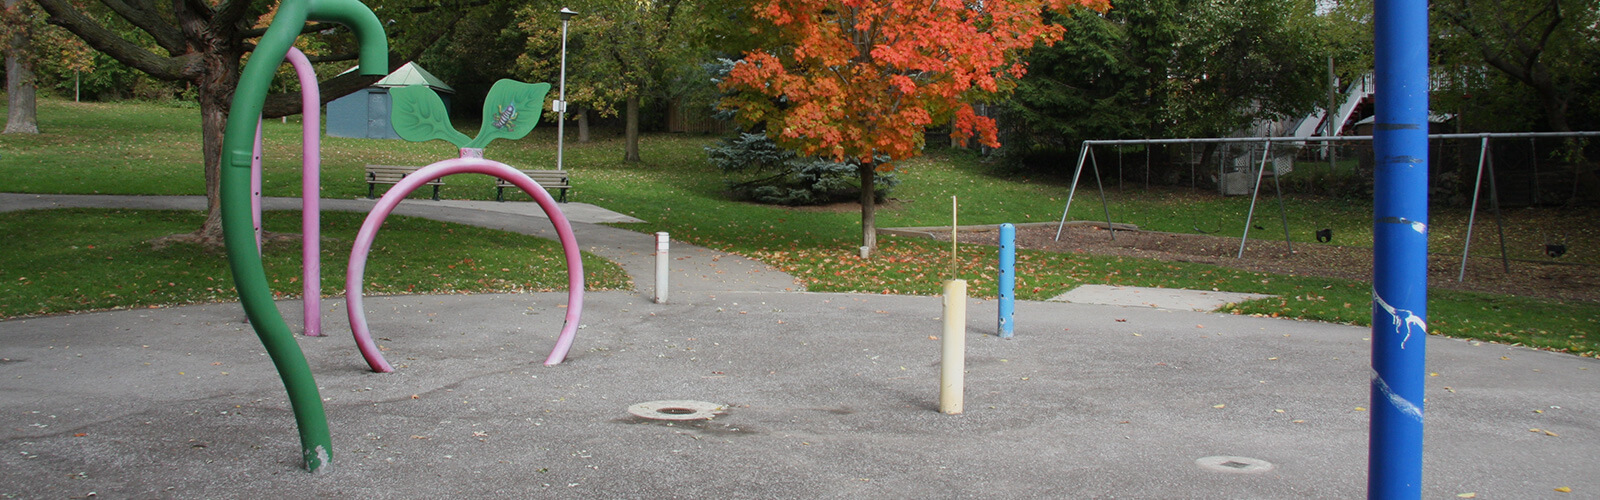 Child-like pipes stick out of the ground around a dry splashpad. A swingset sits beyond it to the right and a paved park trail leads away from it towards two park benches and a green park lawn. Fall trees surround the area.